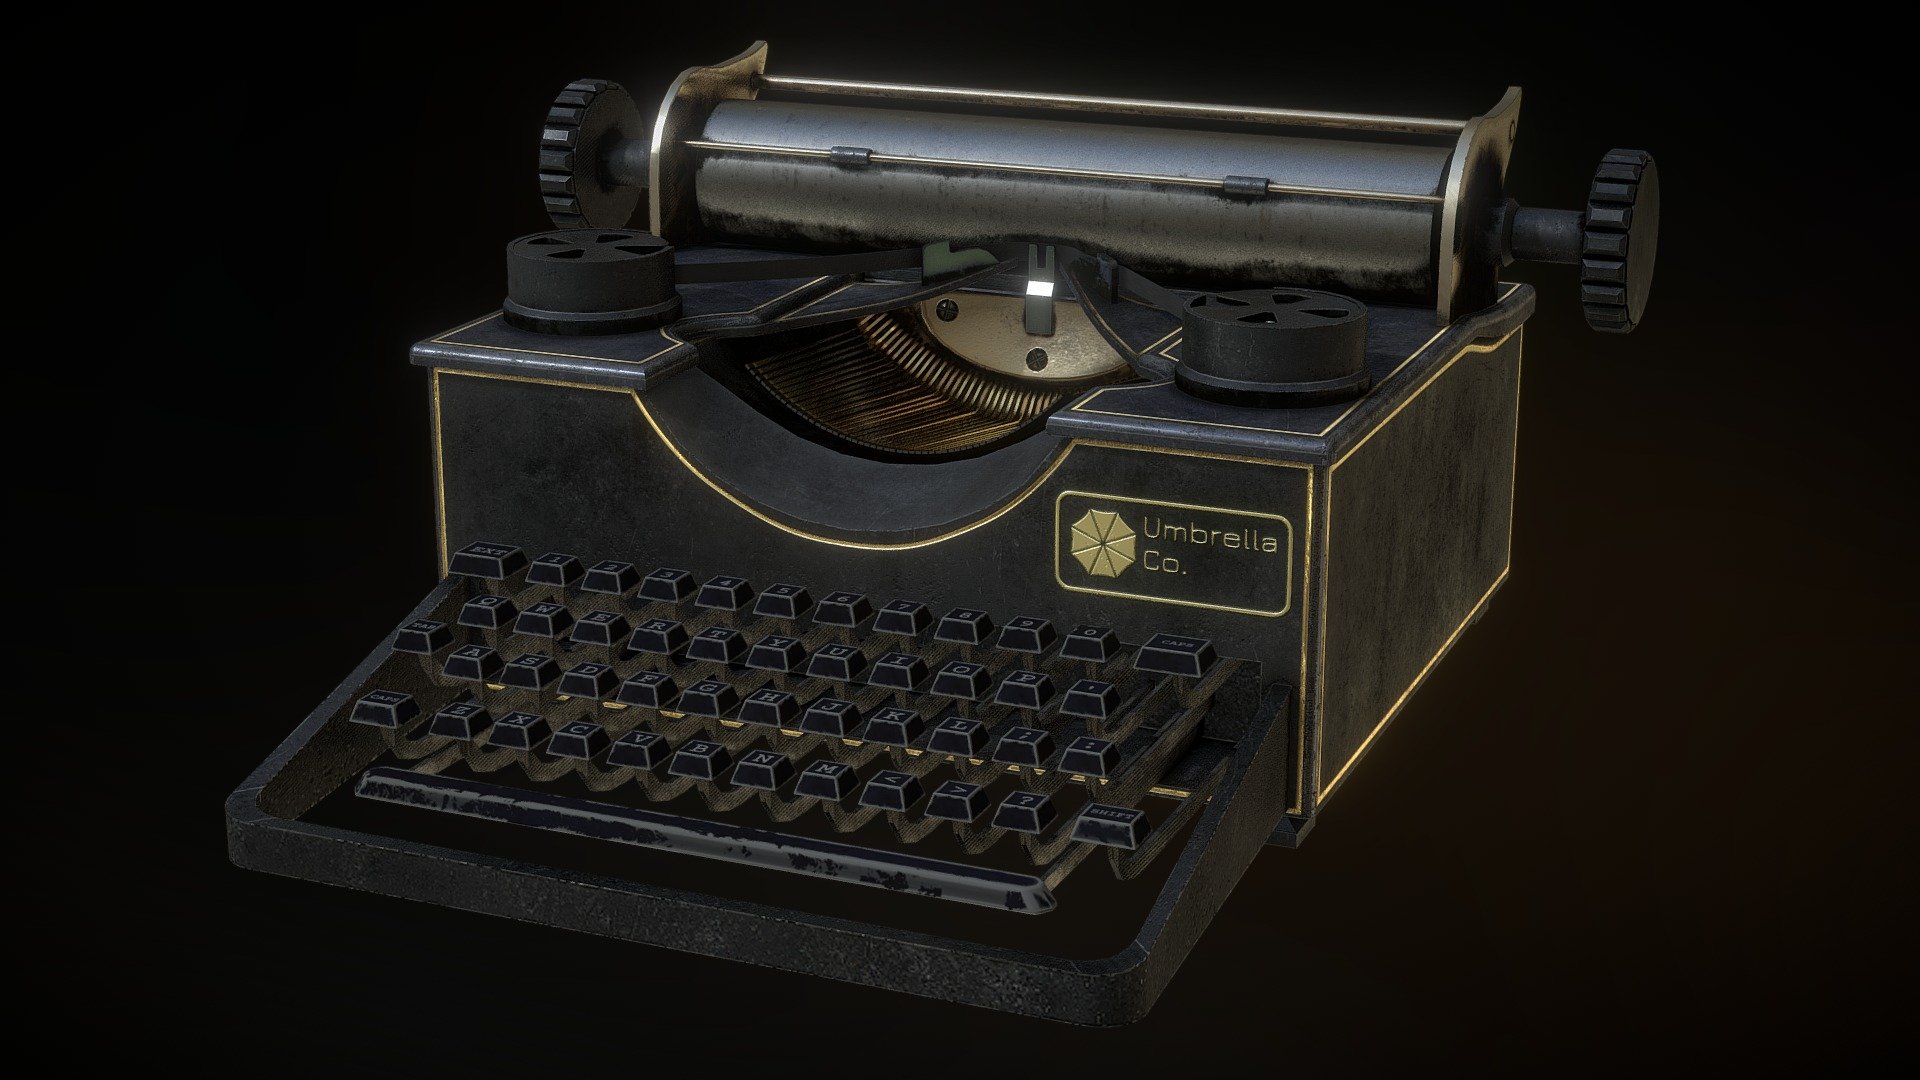 This typewriter was used in my recent environment for the Resident Evil 2 Save Room (Link Below). I wanted to create a seperate project for this, as the typewriters are iconic within the RE game series. This model was made in Maya, textured in Substance Painter and rendered in Marmoset Toolbag. The wood material was provided by MegaScans.
Link to Environment - https://www.artstation.com/artwork/aRQoNJ - Umbrella Typewriter - 3D model by Patrick Faulkner (@PatrickF) 3d model